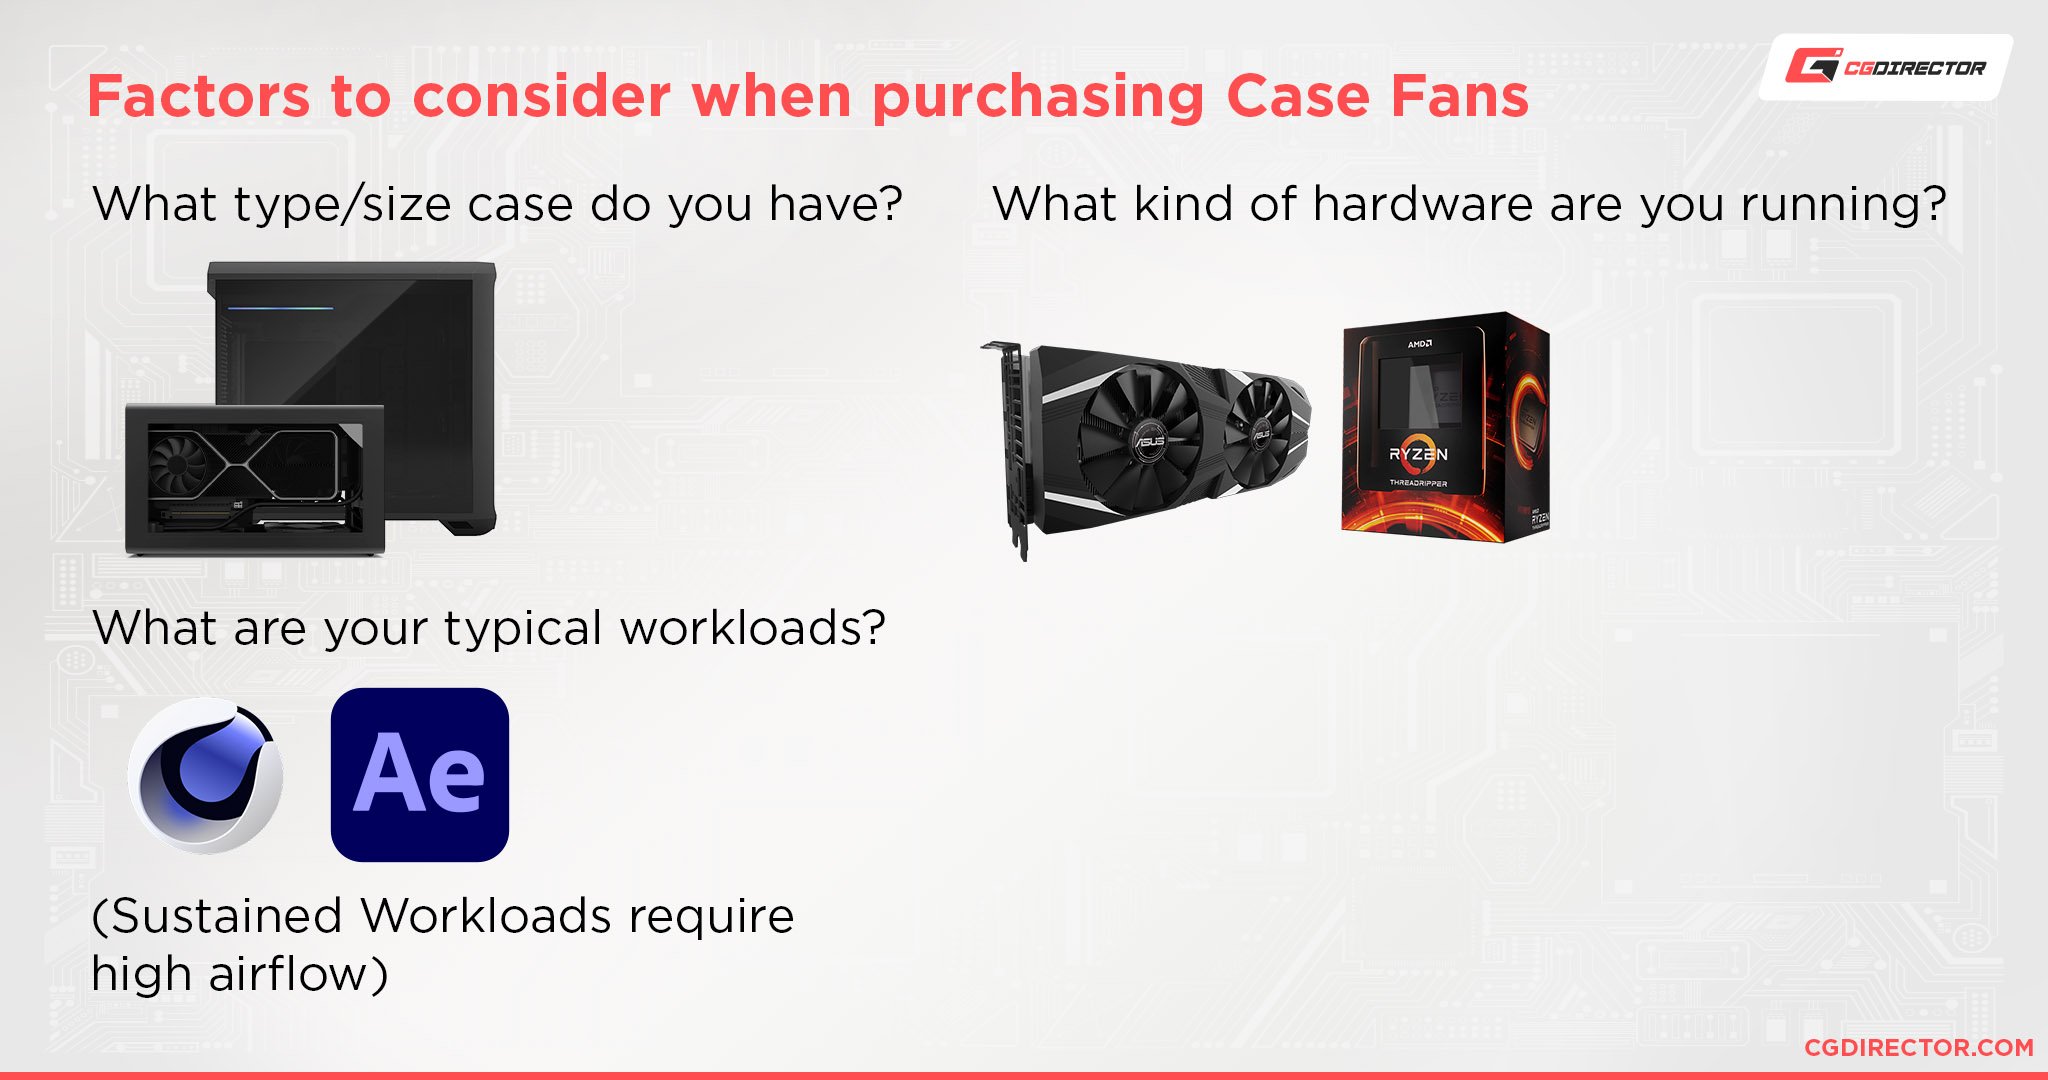 Factors to consider when purchasing Case Fans